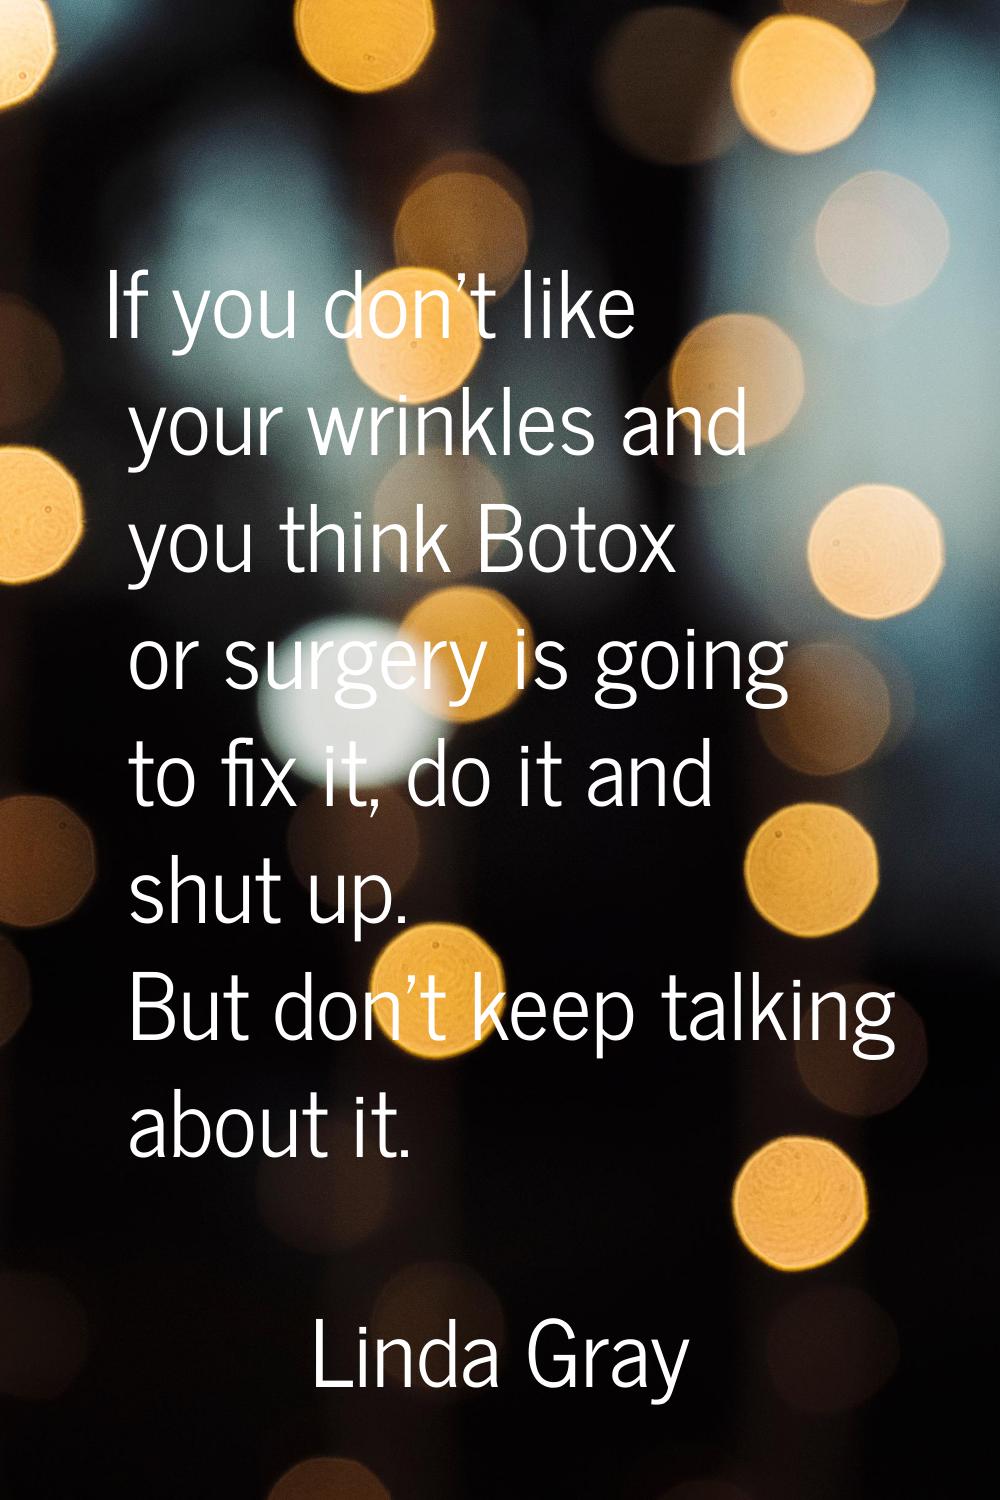 If you don't like your wrinkles and you think Botox or surgery is going to fix it, do it and shut u